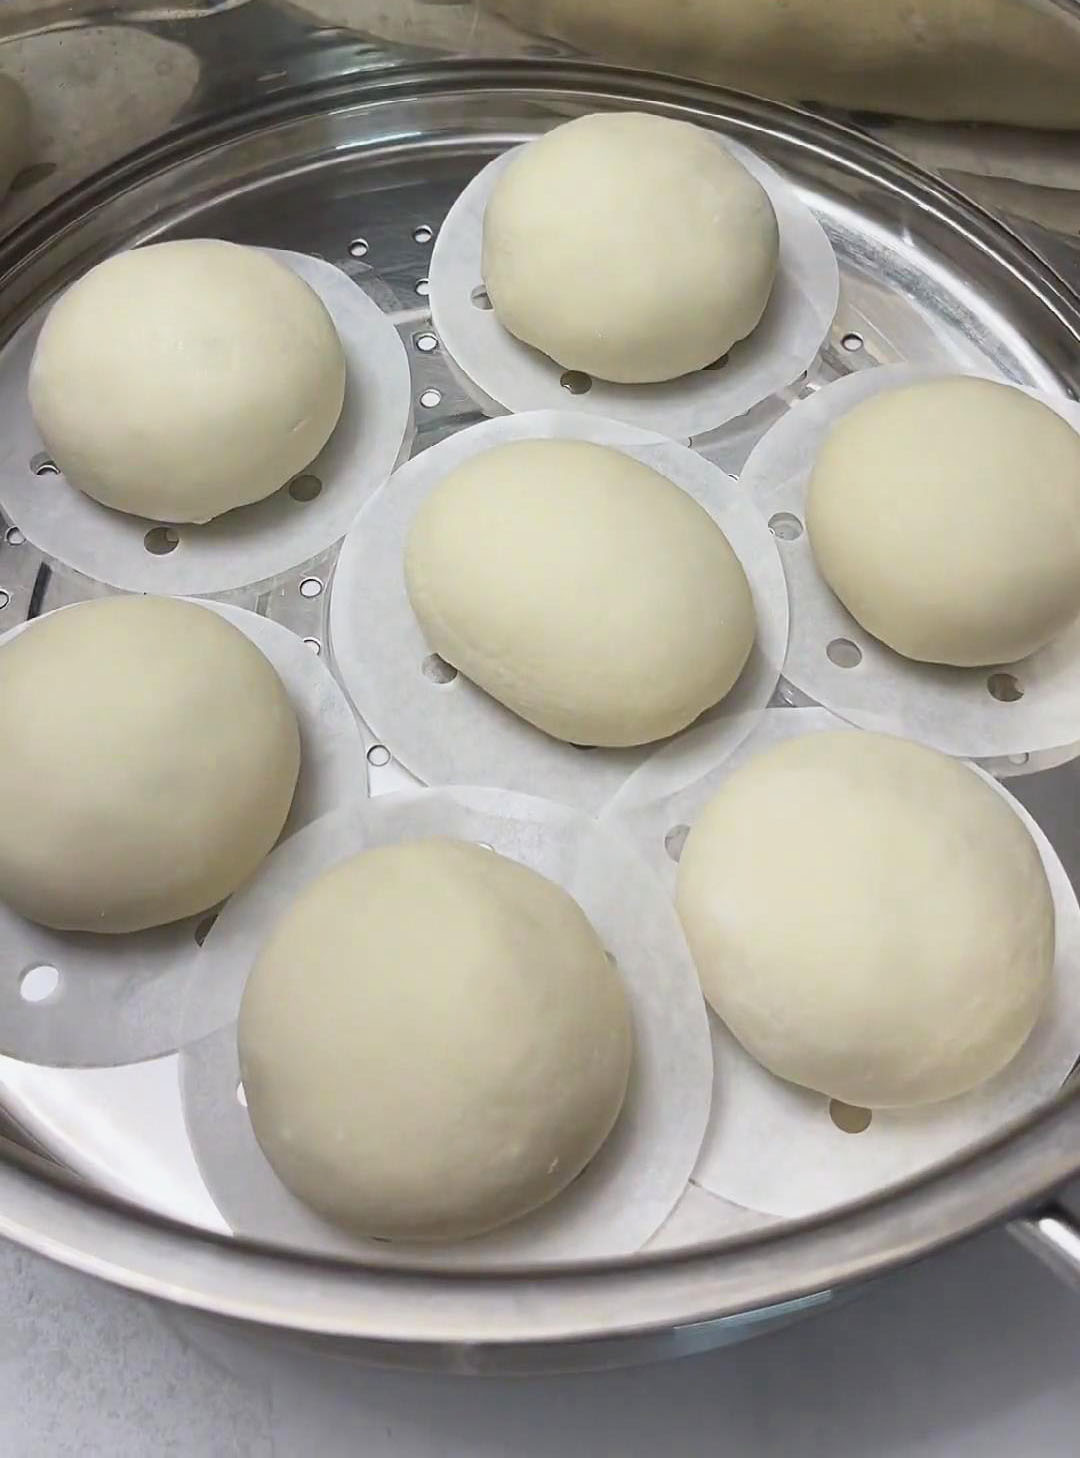 Place the buns in the steamer basket with parchment paper